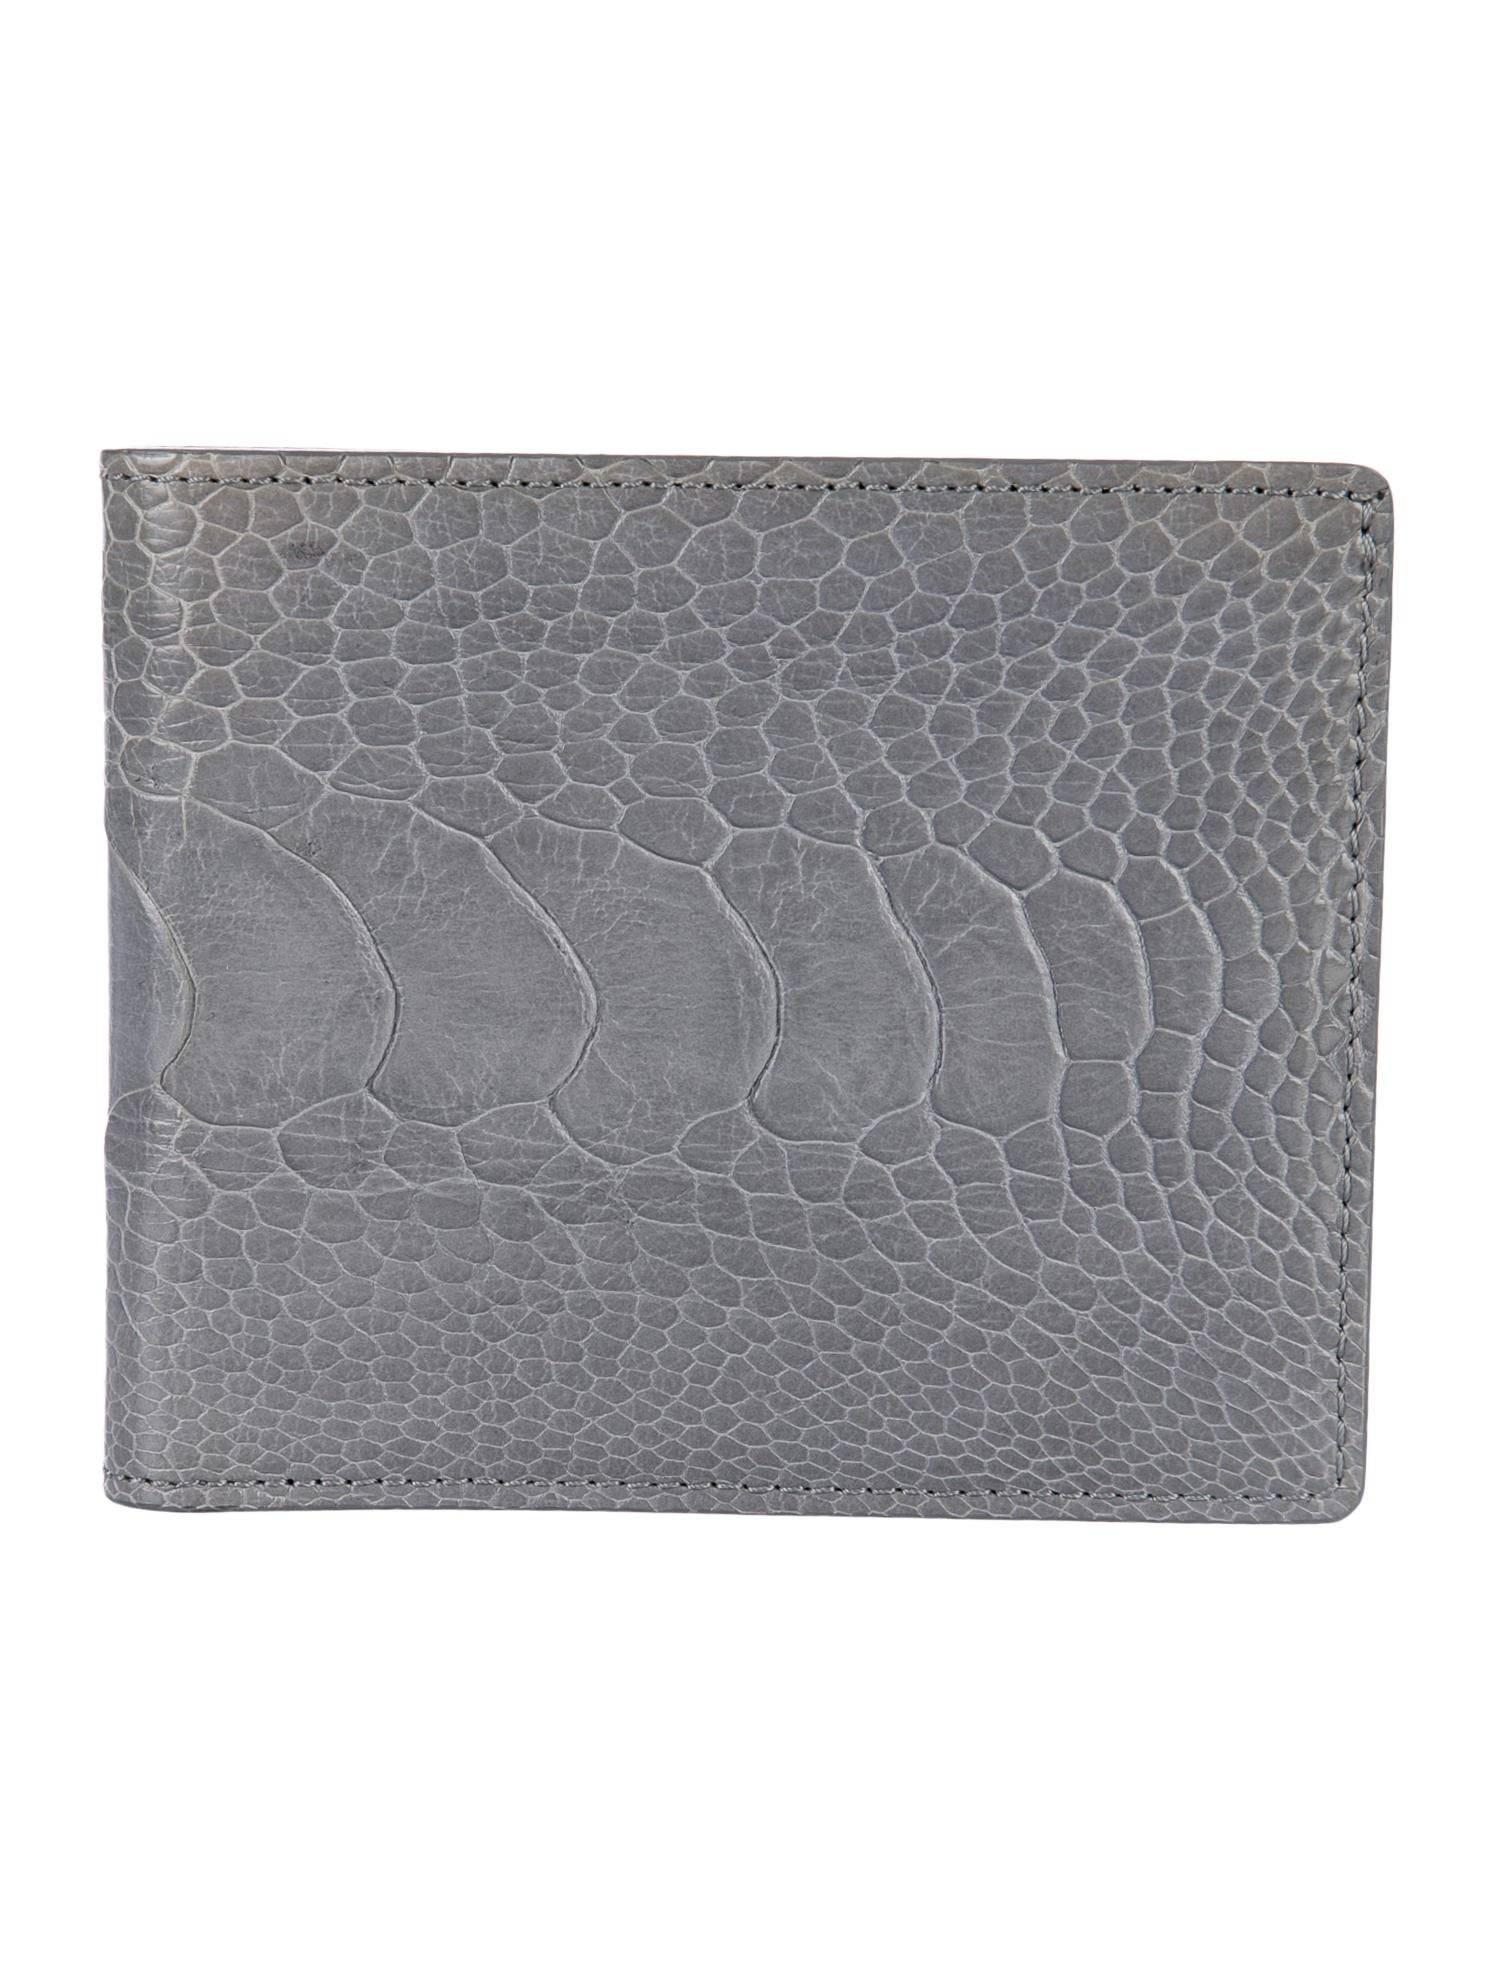 CURATOR'S NOTES

Tom Ford New Gray Exotic Skin Men's Bifold Wallet in Storage Bag

Ostrich leg 
Fold over closure
Made in Italy 
Measures 4.25" W x 3.5" H
Includes original Tom Ford dust bag 